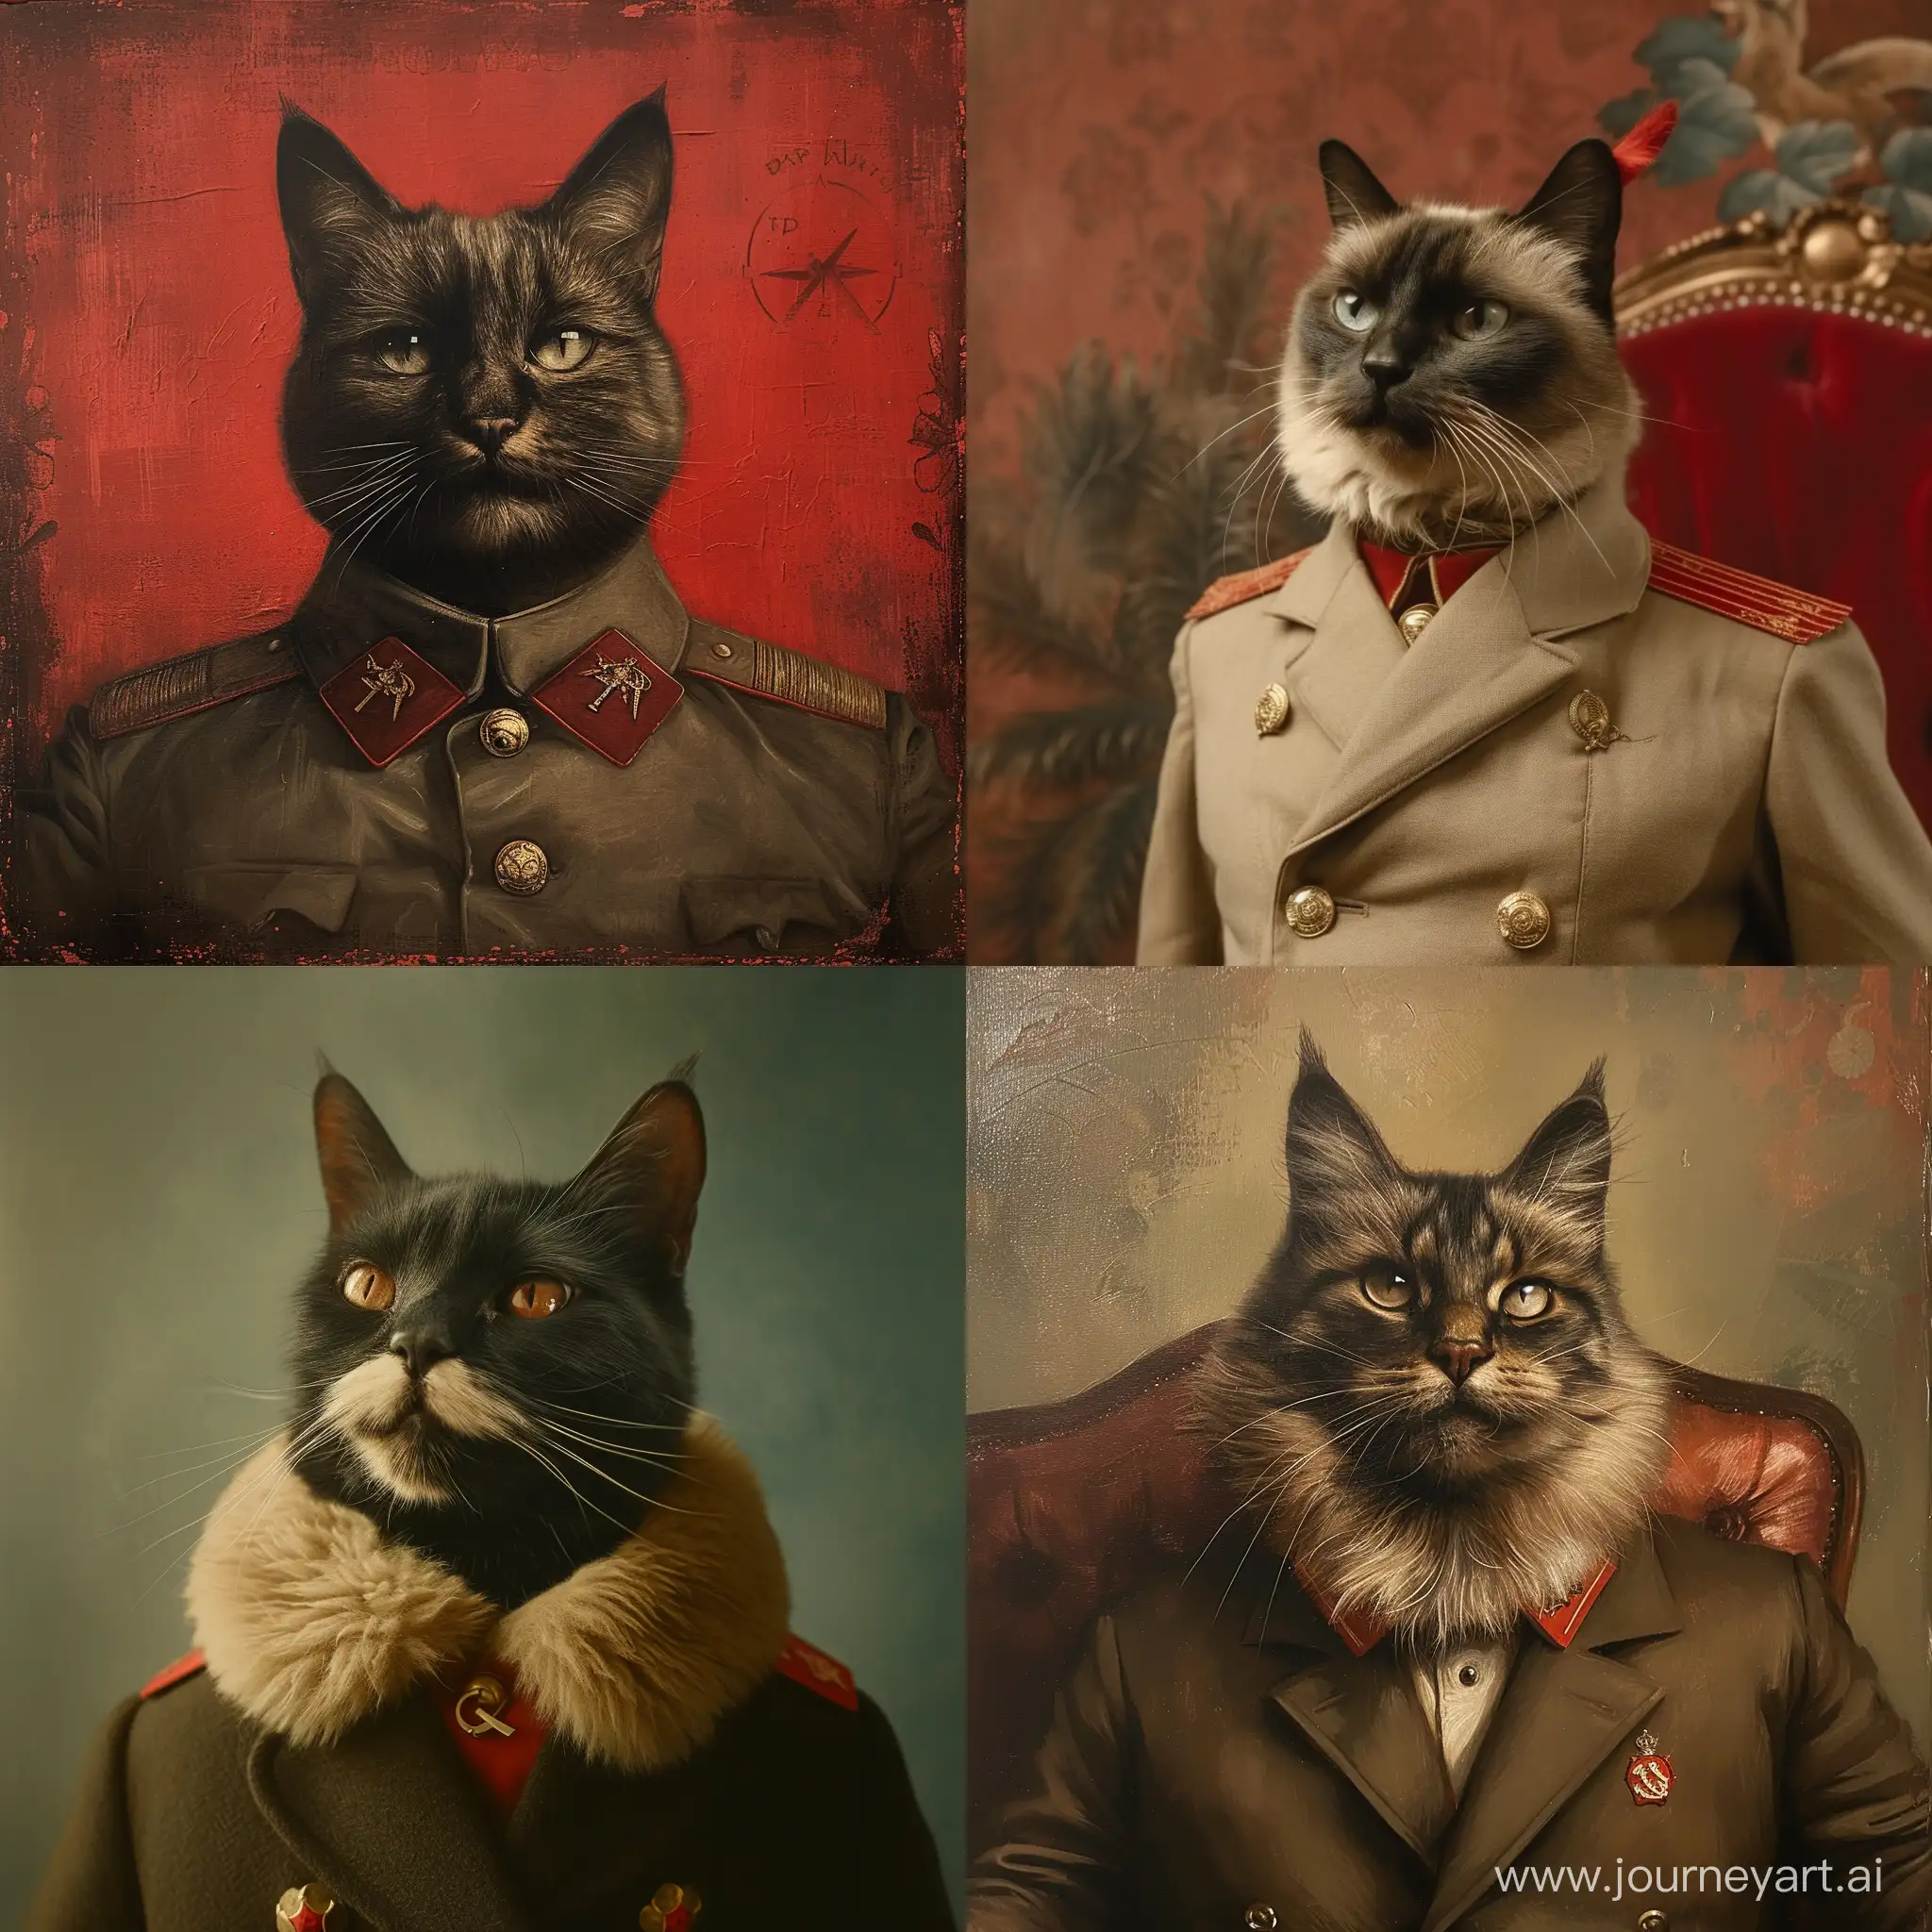 Official portrait of kitty as Joseph Stalin 